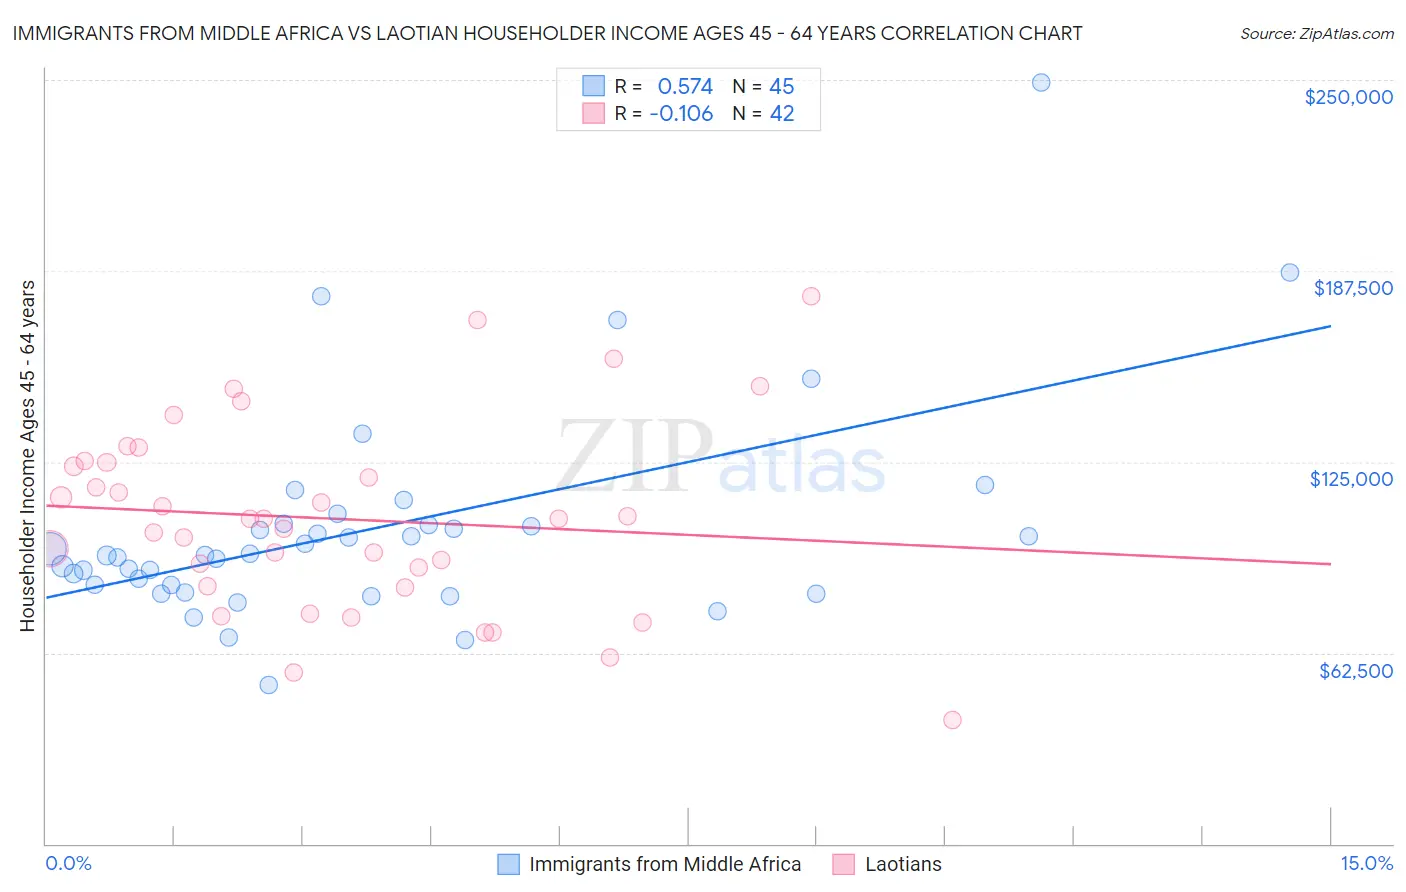 Immigrants from Middle Africa vs Laotian Householder Income Ages 45 - 64 years